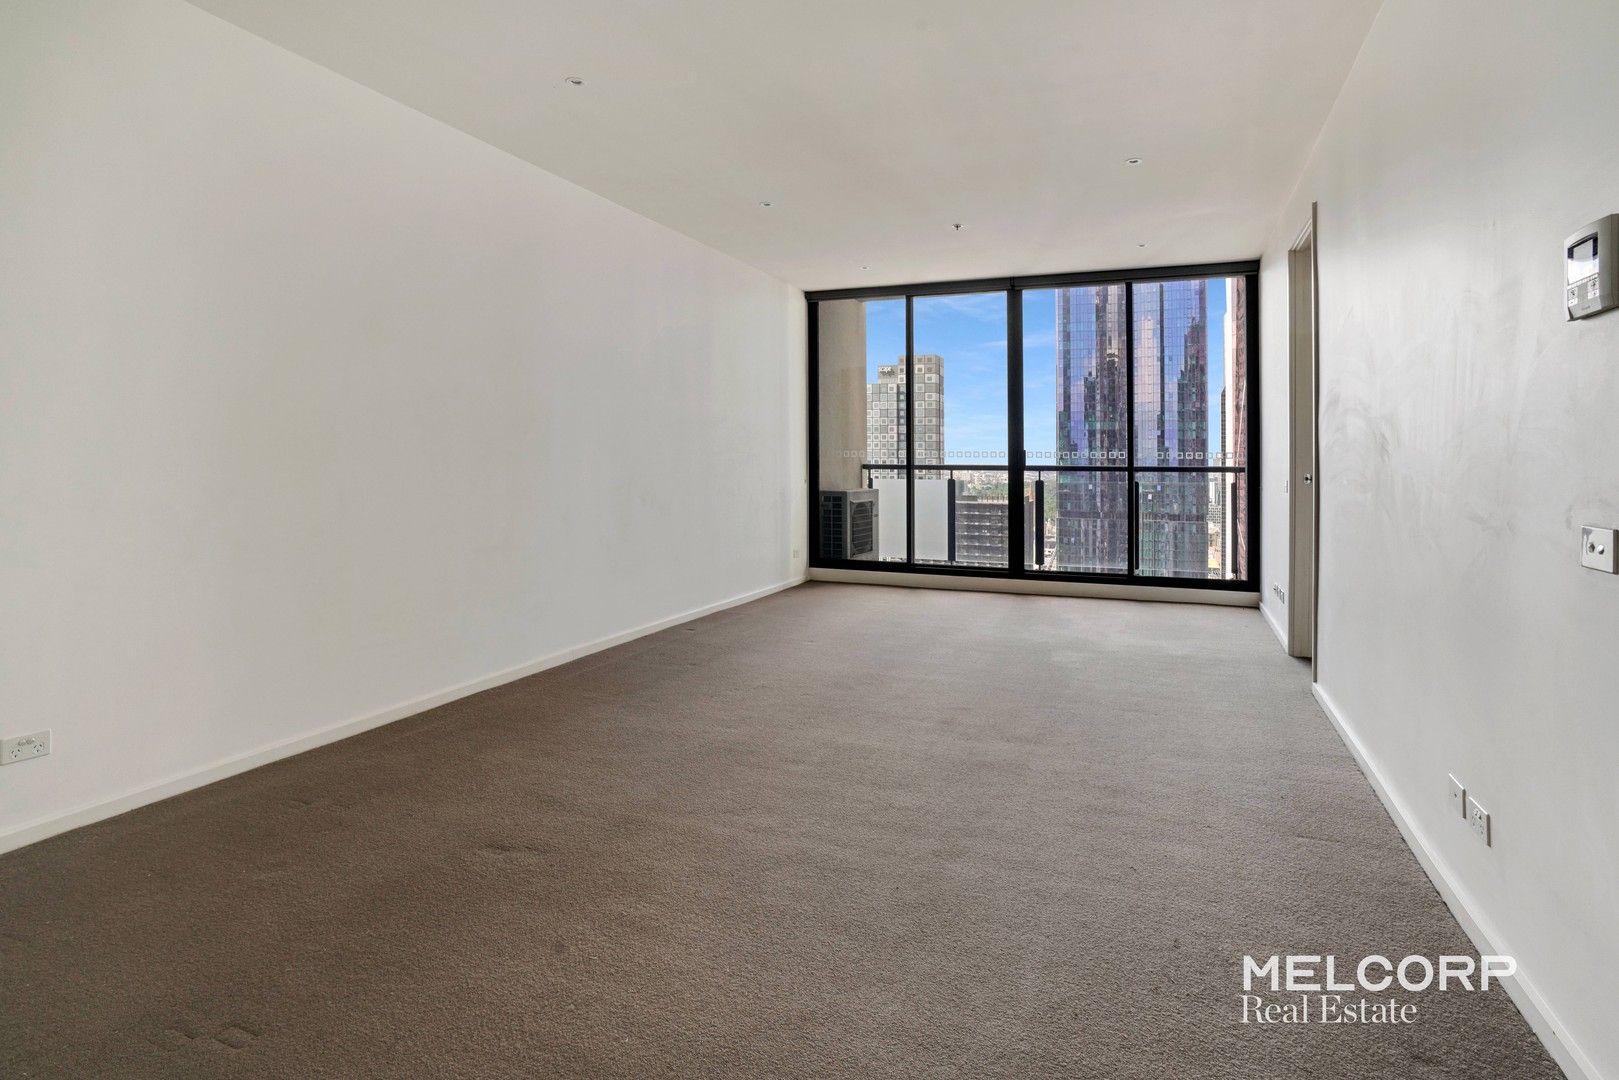 2 bedrooms Apartment / Unit / Flat in 3106/27 Therry Street MELBOURNE VIC, 3000